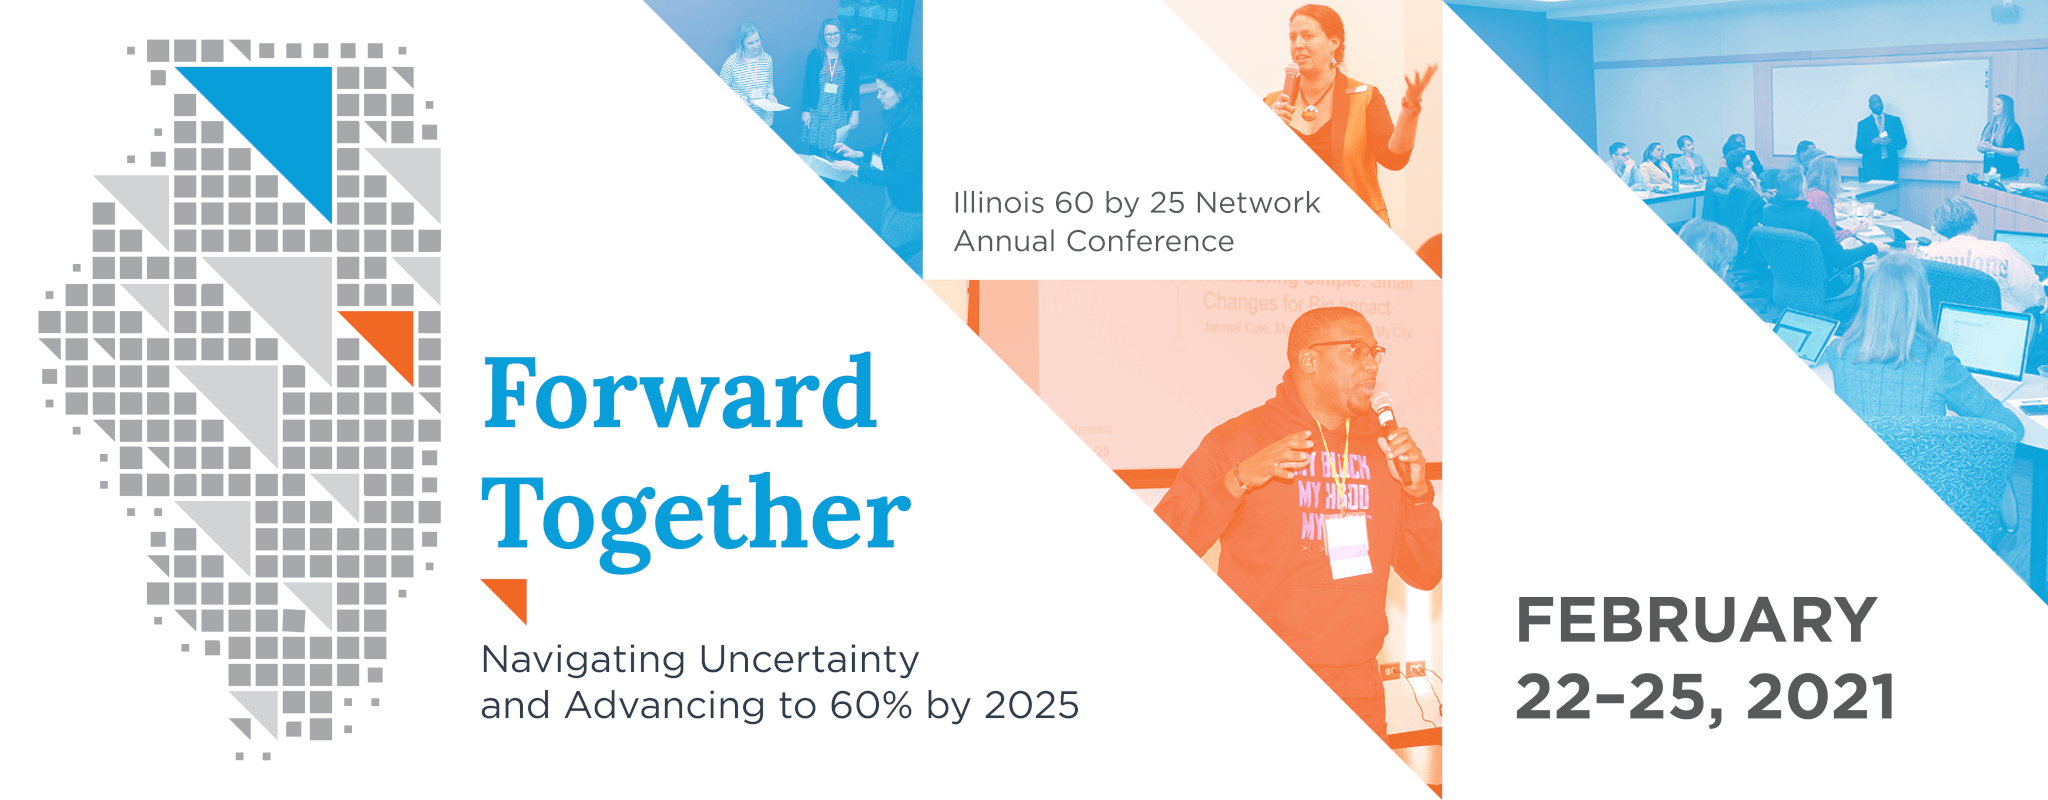 Forward Together: Navigating Uncertainty and Advancing to 60% by 2025. The Illinois 60 by 25 Network Annual Conference, February 22-25, 2021.